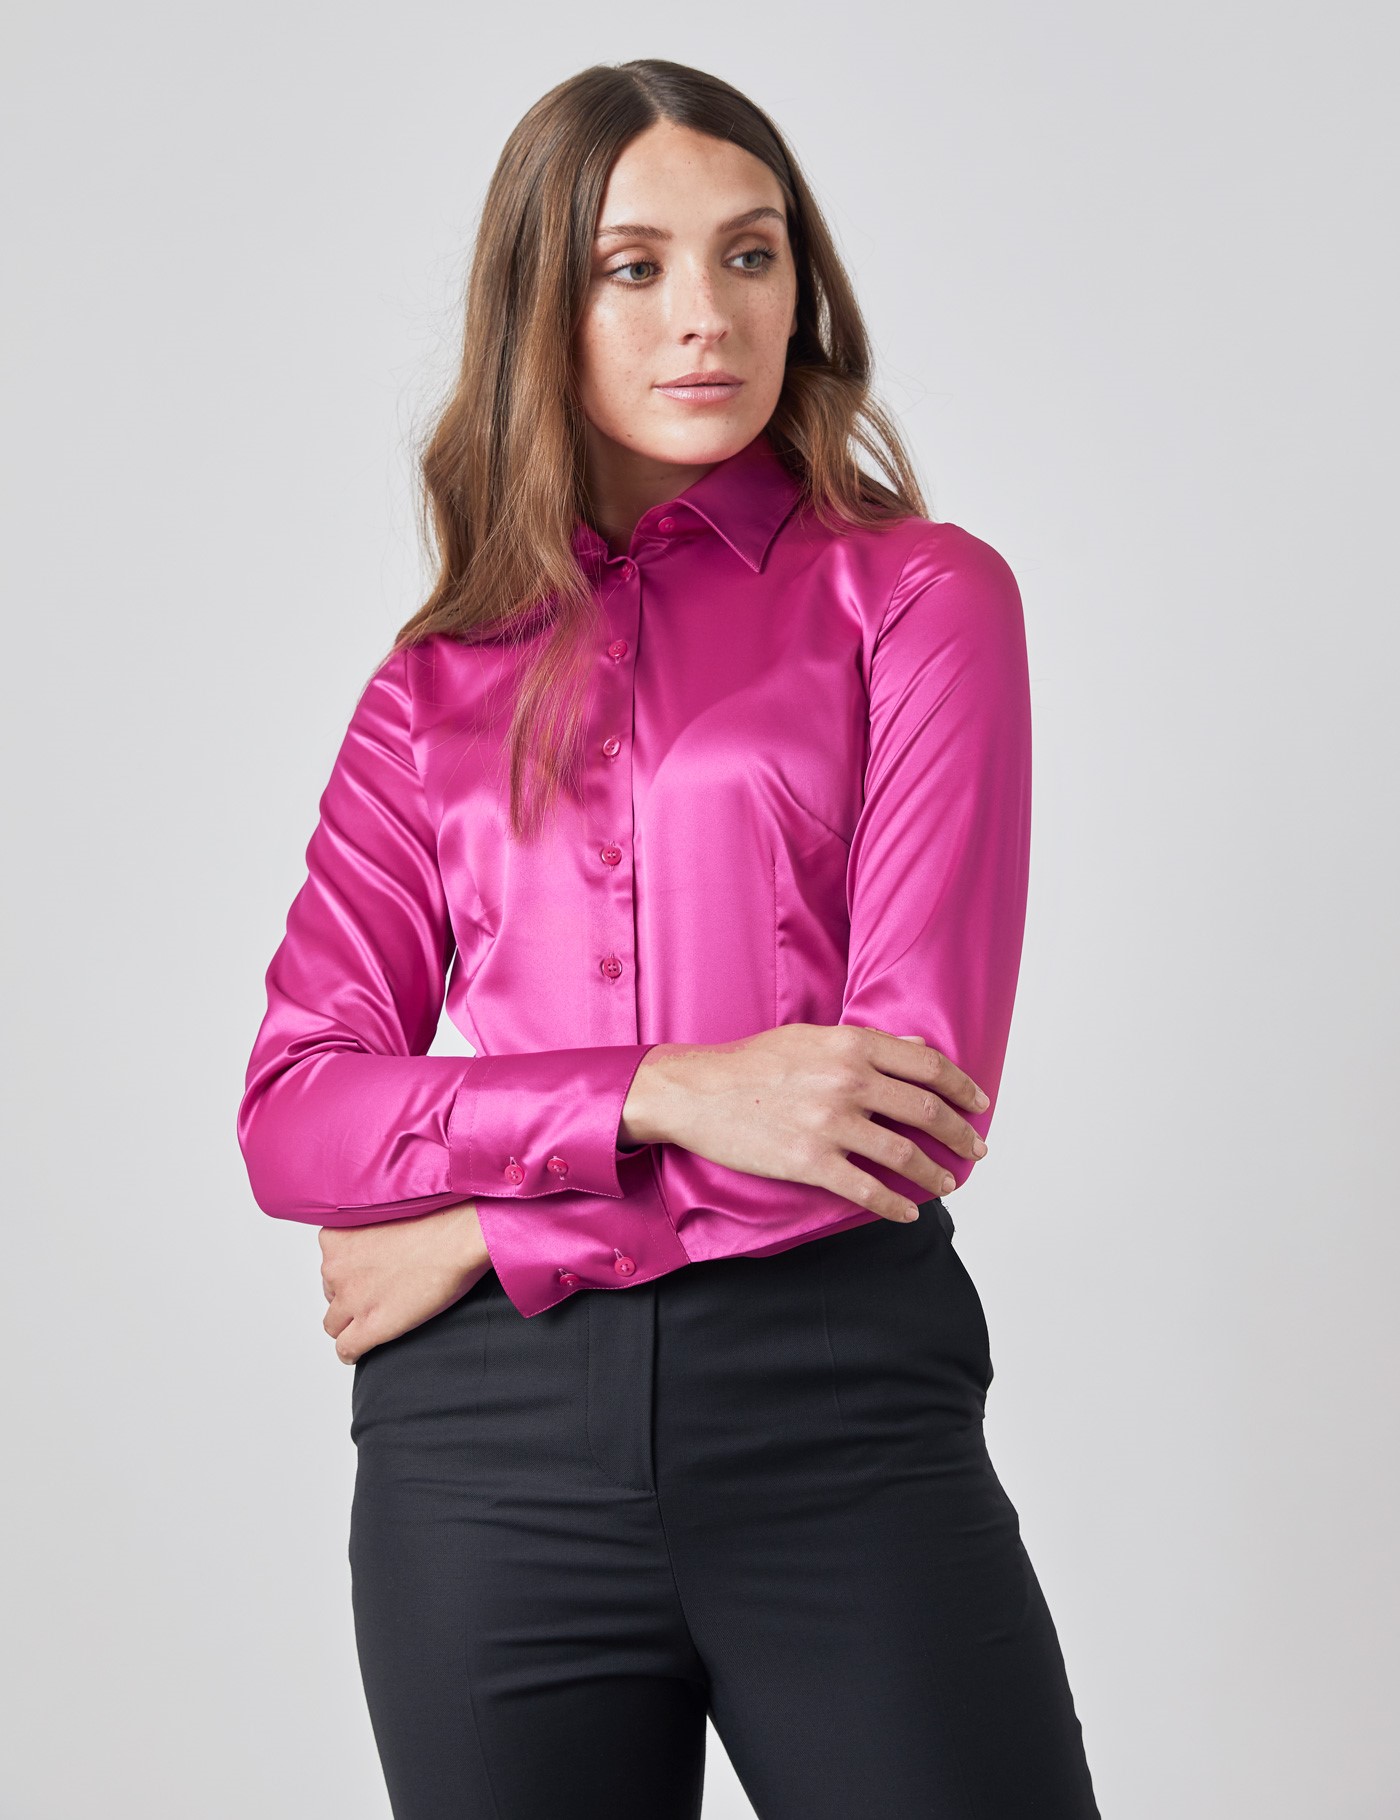 Plain Satin Stretch Women S Fitted Shirt With Single Cuff In Bright Pink Hawes And Curtis Uk